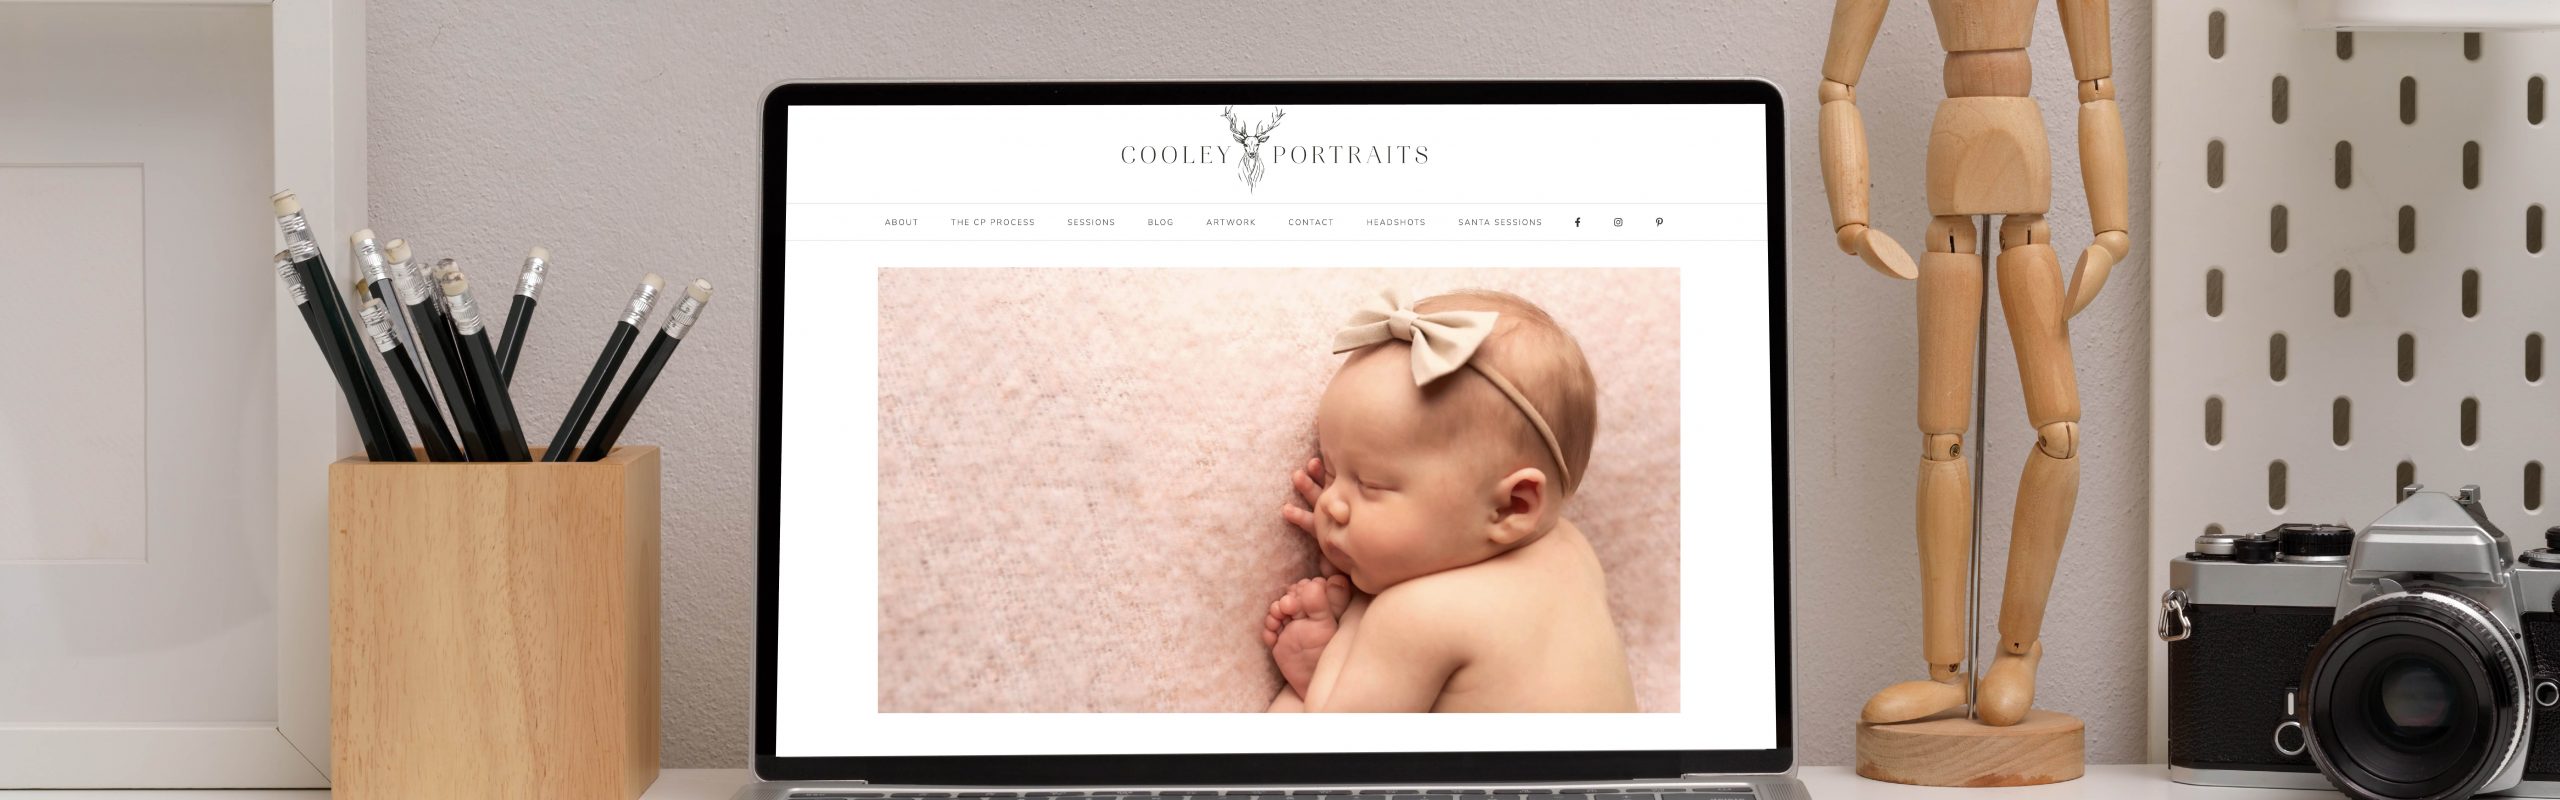 A laptop on a desk displaying a website featuring an image of a sleeping baby with a bow on its head; next to the laptop are pencils in a holder, a wooden artist's mannequin,